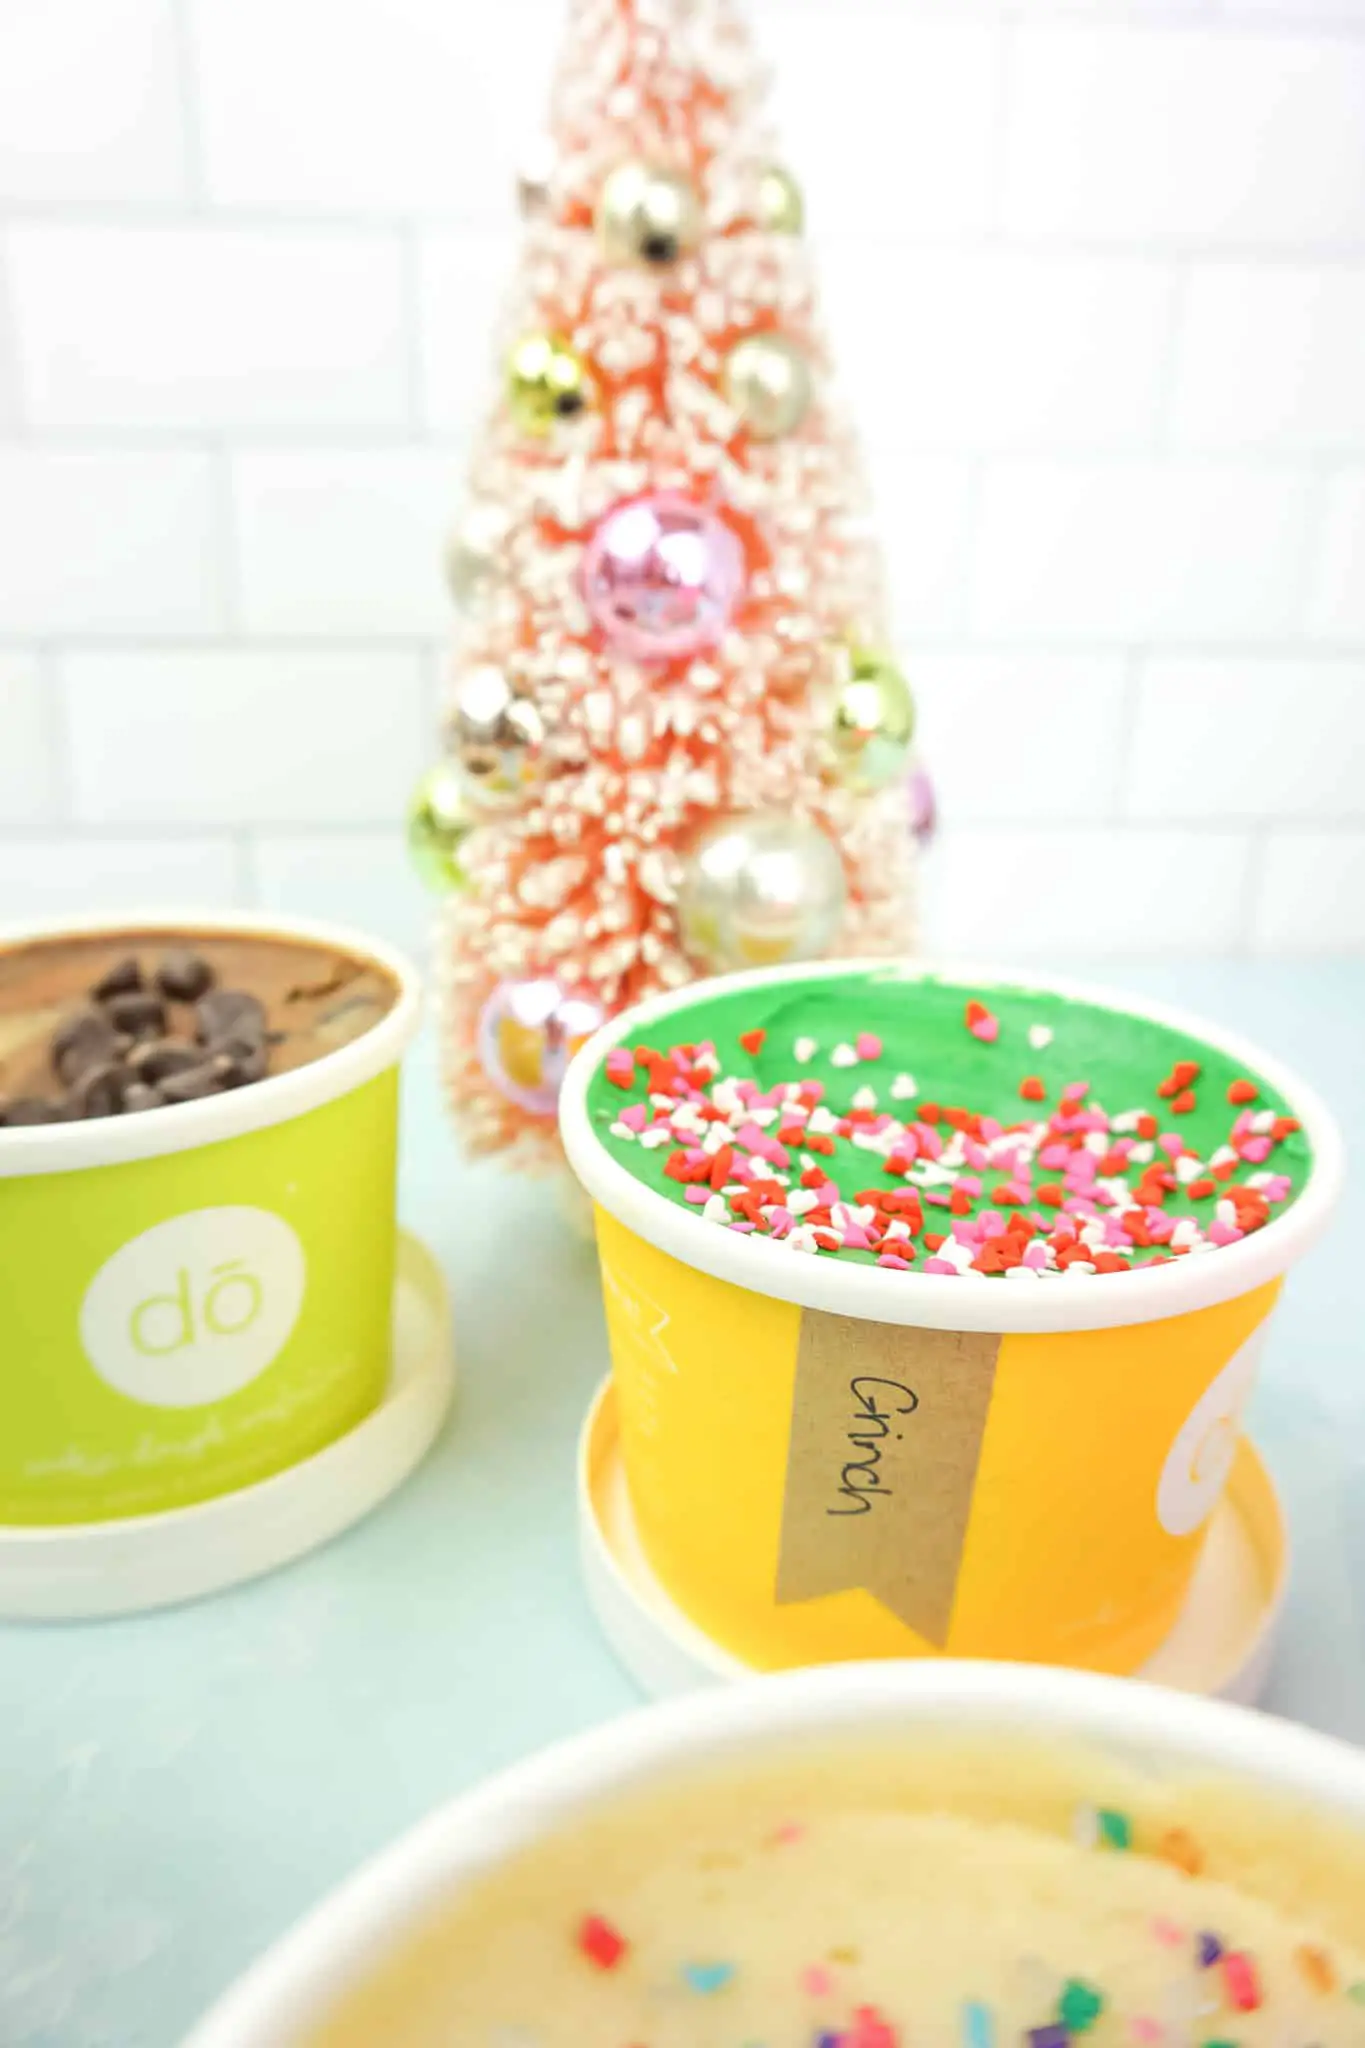 DŌ, Cookie Dough Confections The Perfect Sweet Treat